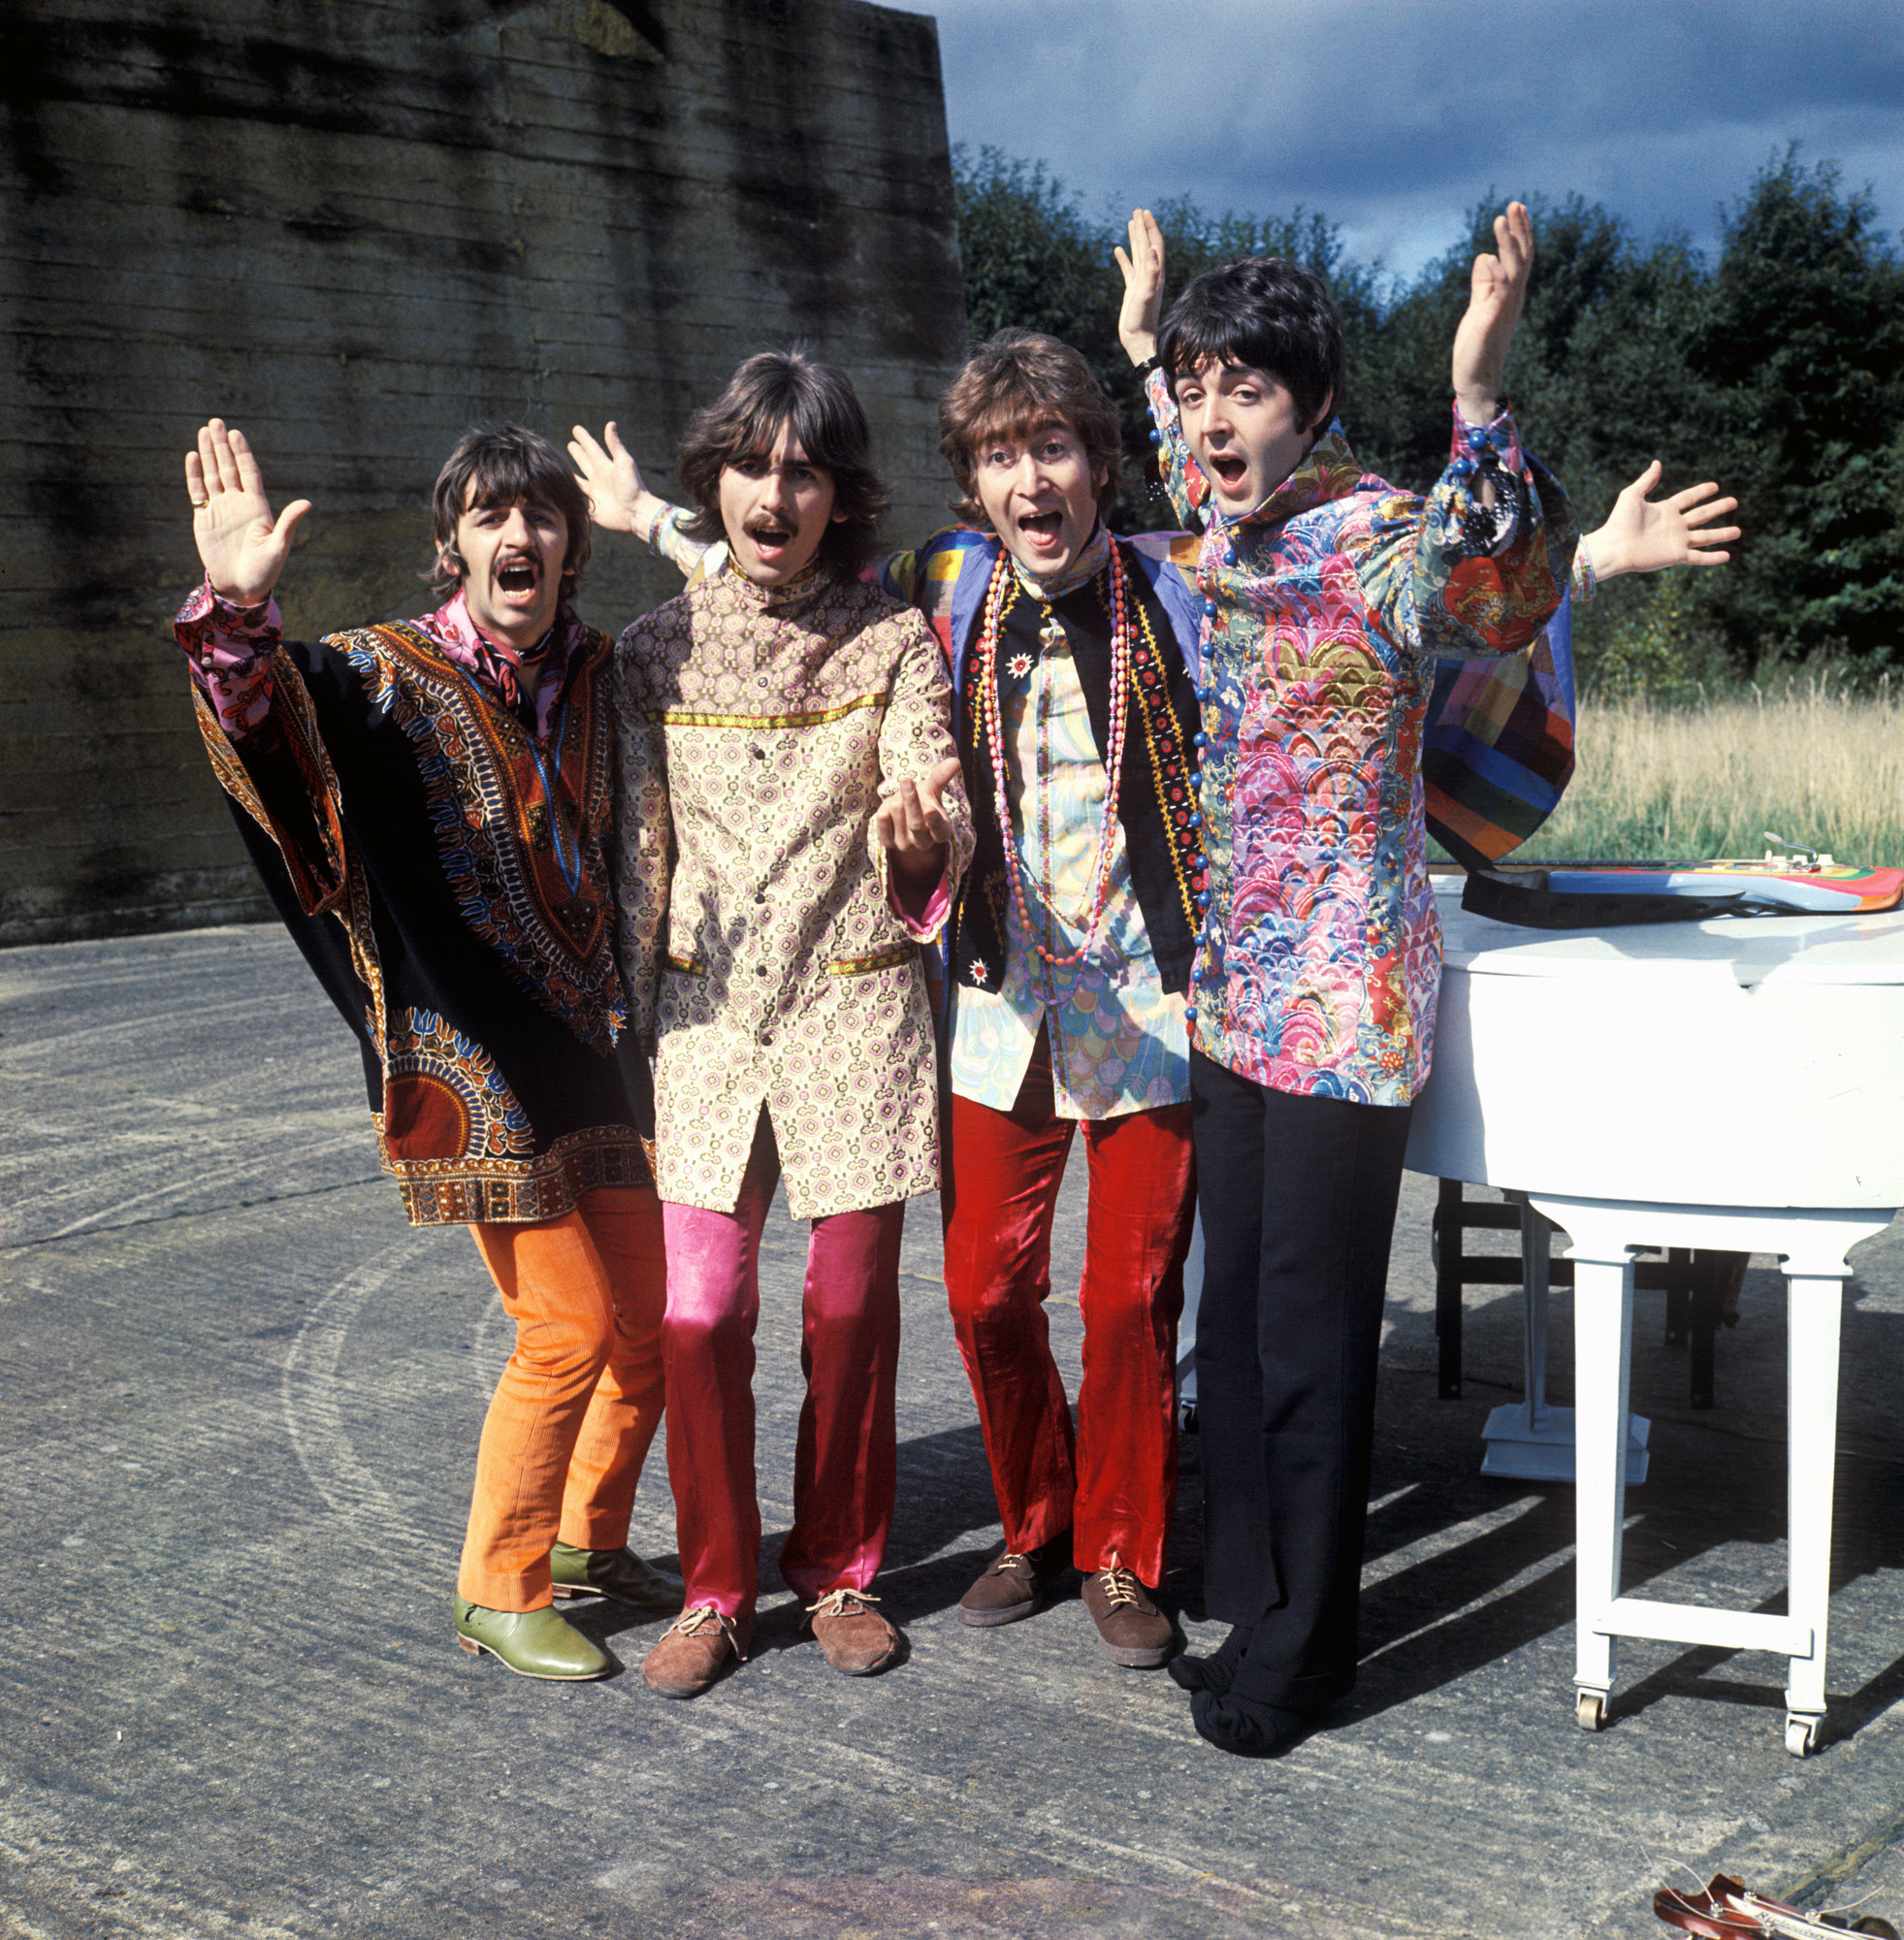 Press photo of The Beatles during Magical Mystery Tour.